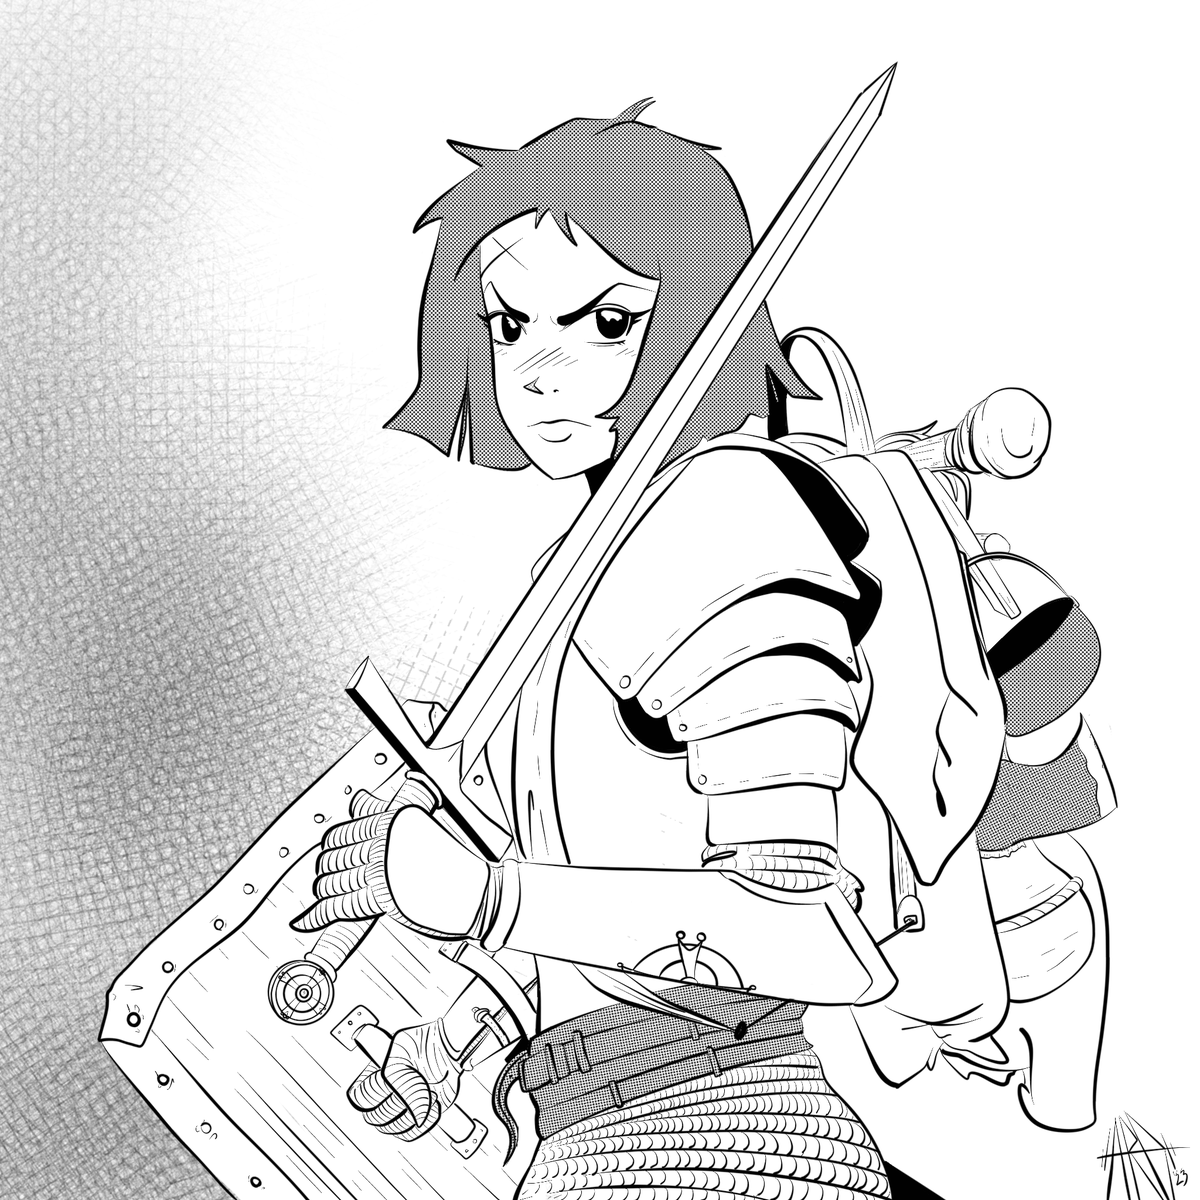 Some more #dungeonsanddragons #characterportraits for more #drawingpractice. #fantasyart This time a left handed, new #paladin of #StCuthbert #dungeonsanddragonsart #characterportrait #illustration #mangaart #procreate #screentones #retroanime